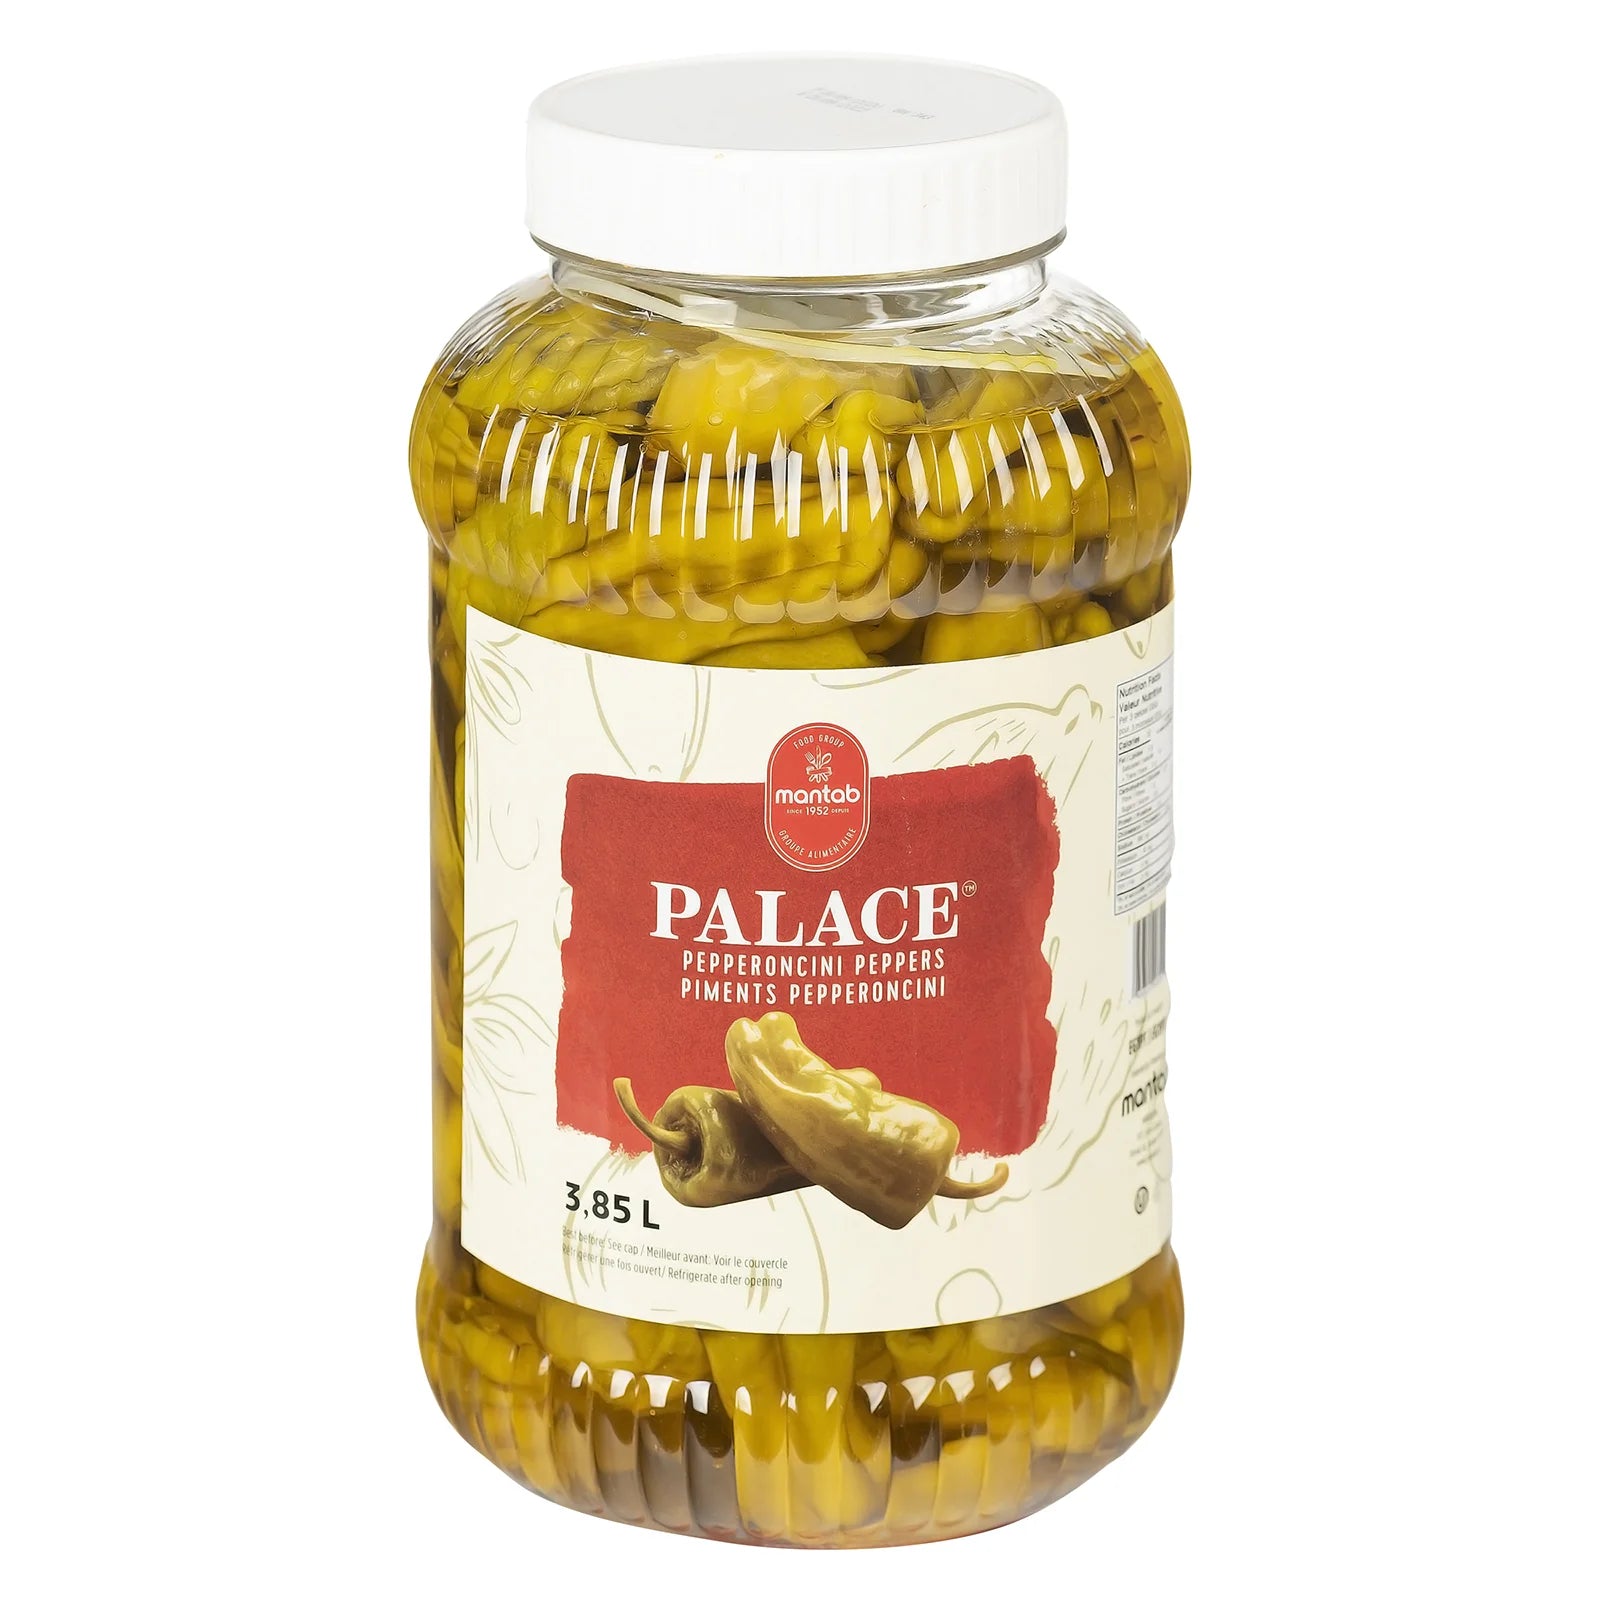 Palace - Pepperoncini Peppers